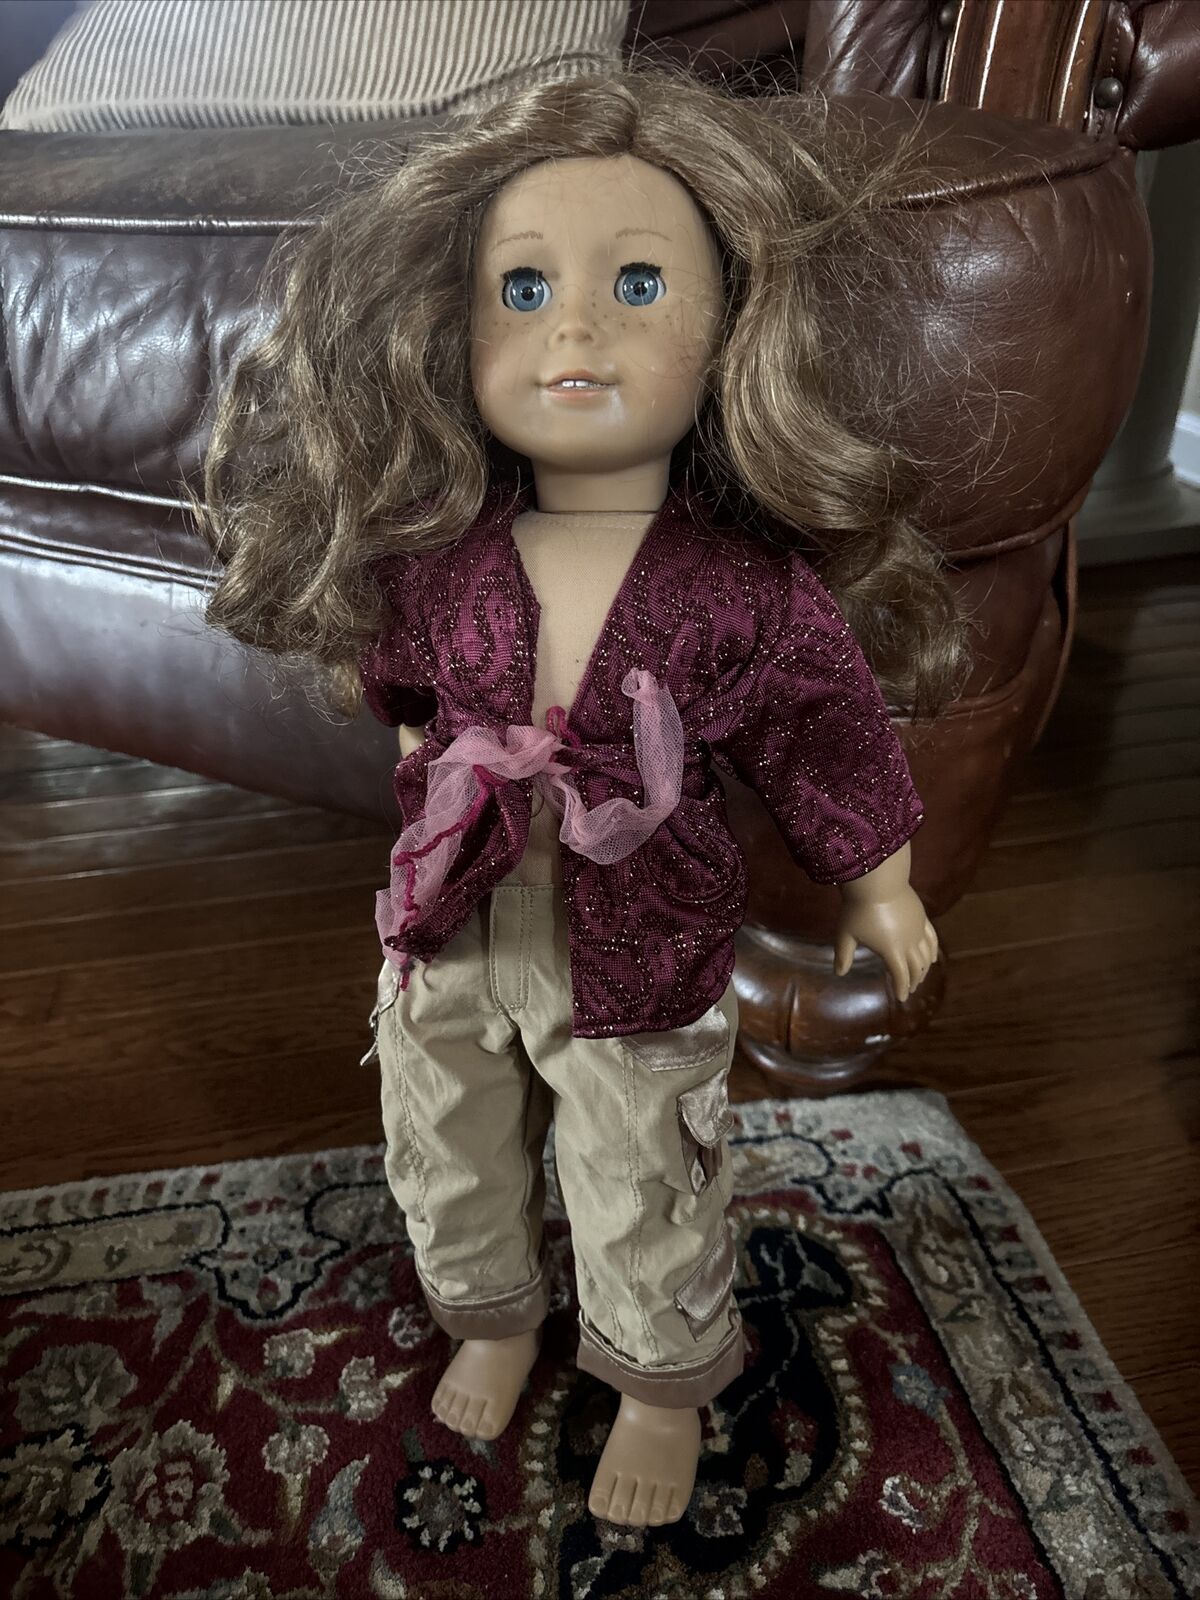 American Girl Doll Blonde Hair Blue Eyes with Freckles